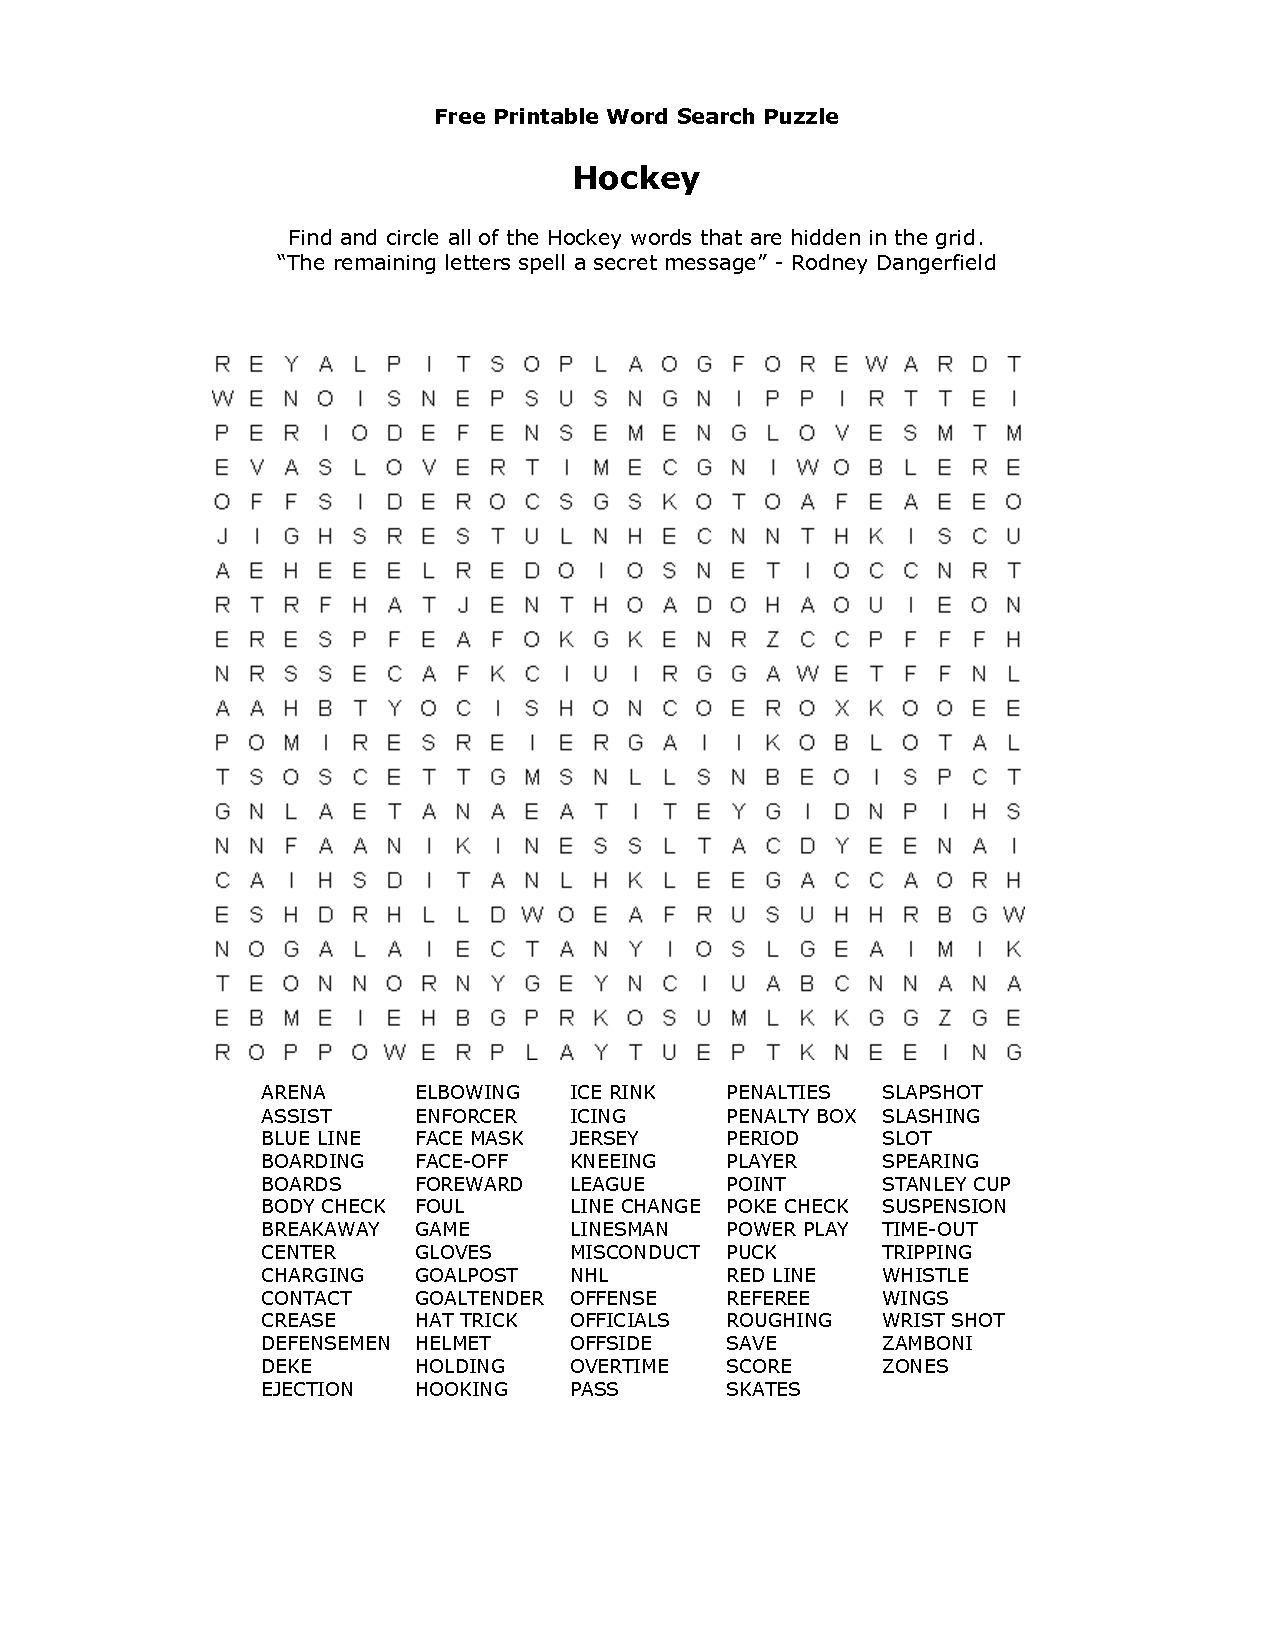 Free Printable Word Searches | Kiddo Shelter | Games | Free - Free Printable Word Finds